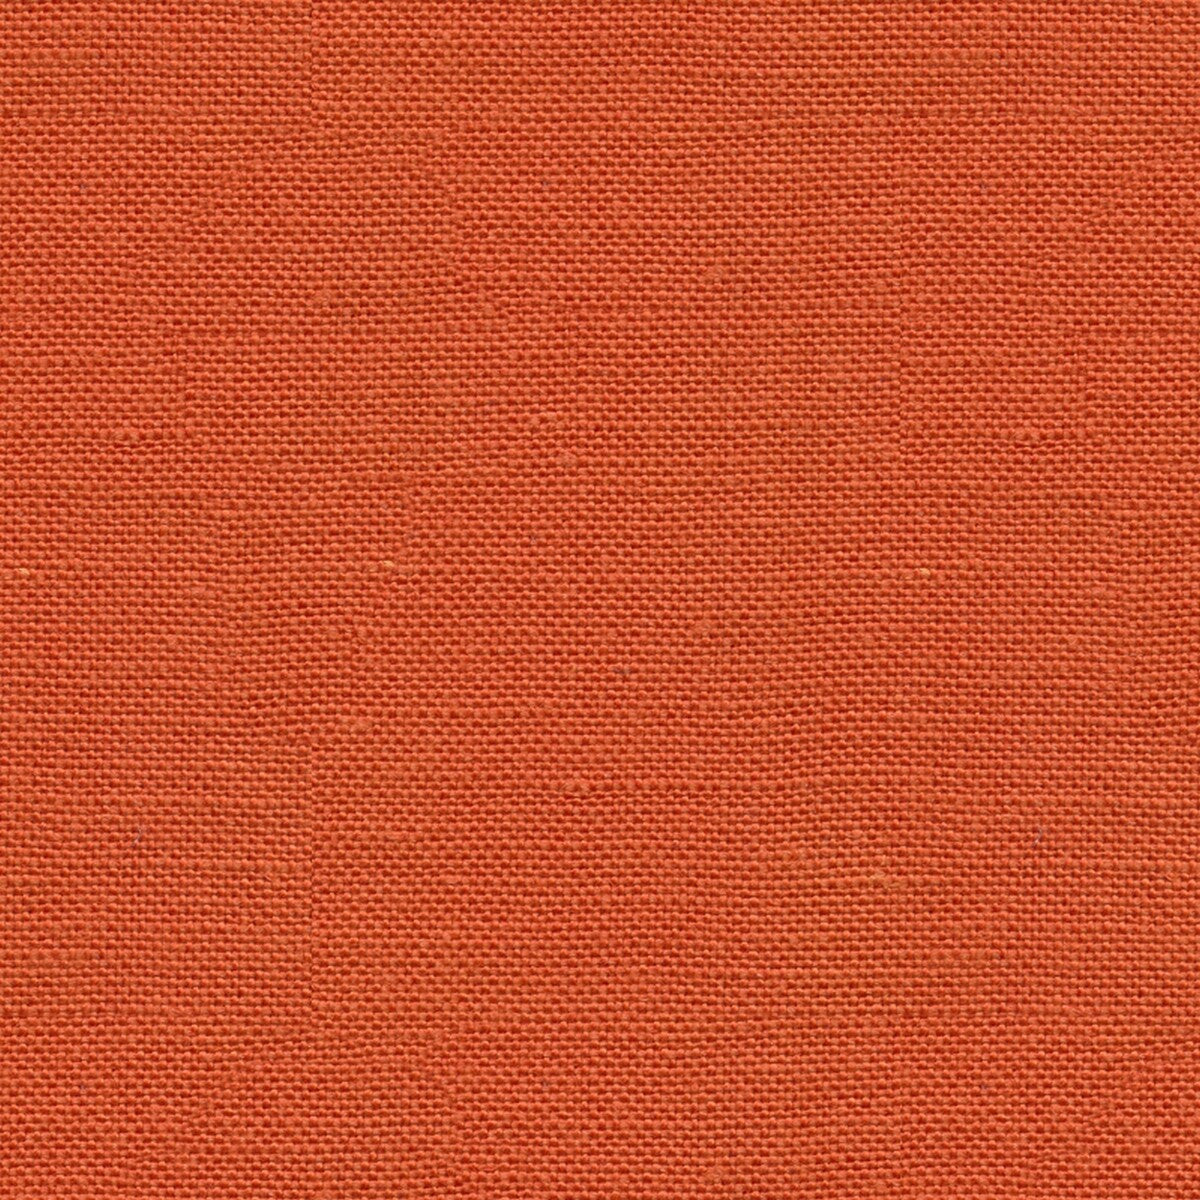 Lea fabric in sienna color - pattern J0337.338.0 - by G P &amp; J Baker in the Crayford collection